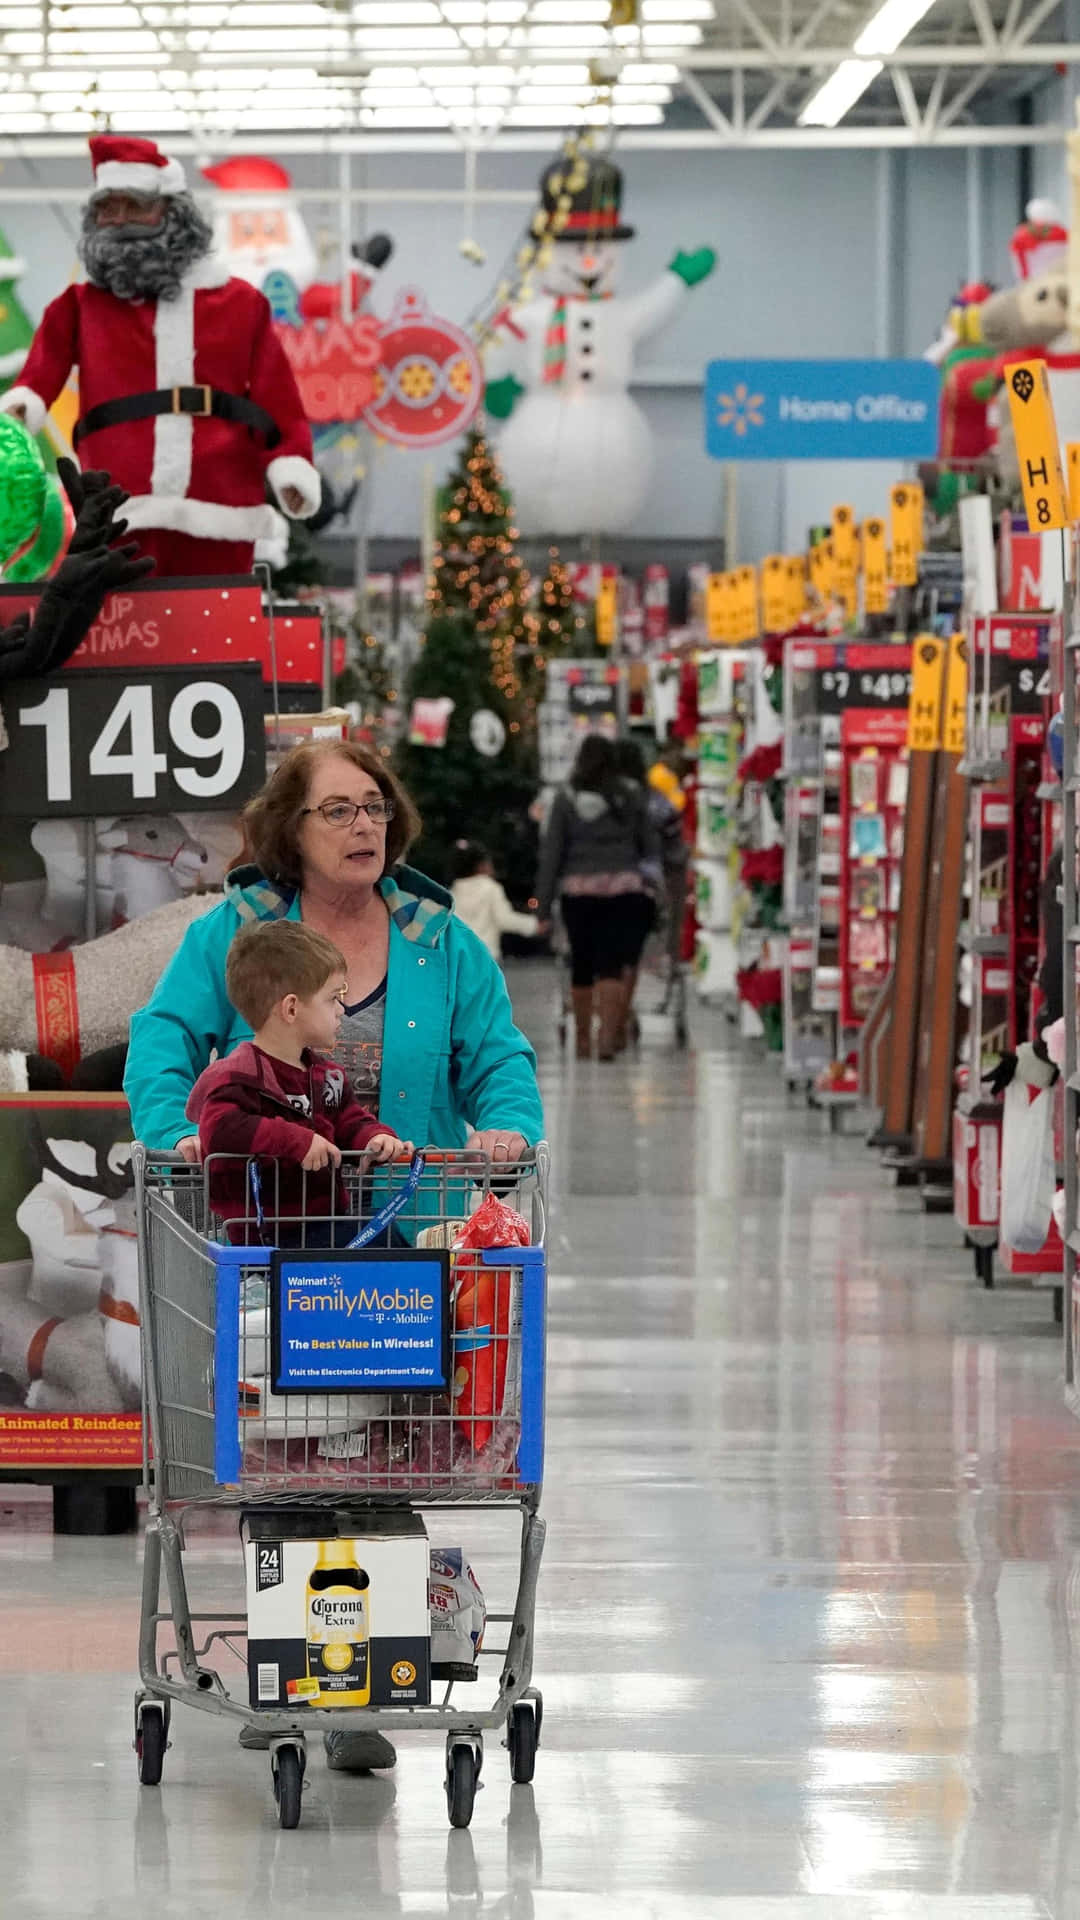 Walmart Shoppers Searching for Great Deals